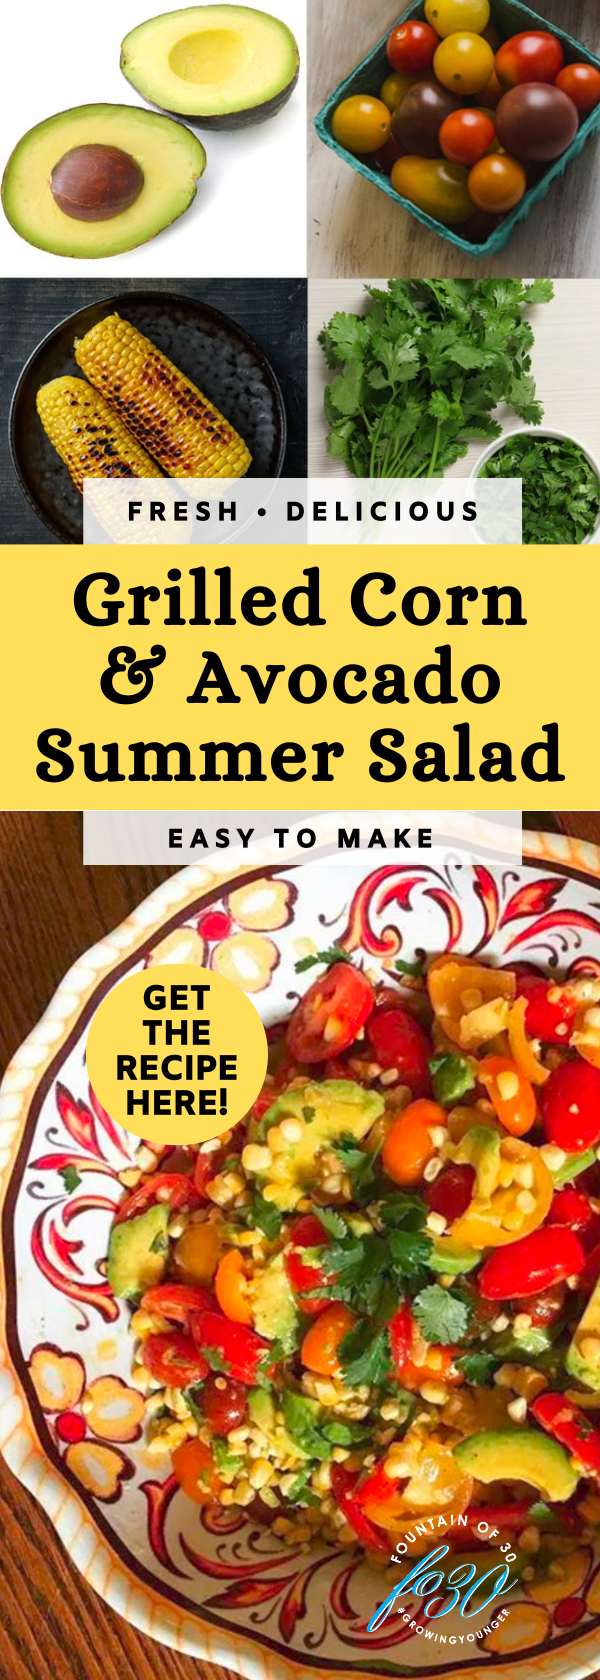 grilled corn summer salad with avocado, tomatoes and cilantro founbtainof30